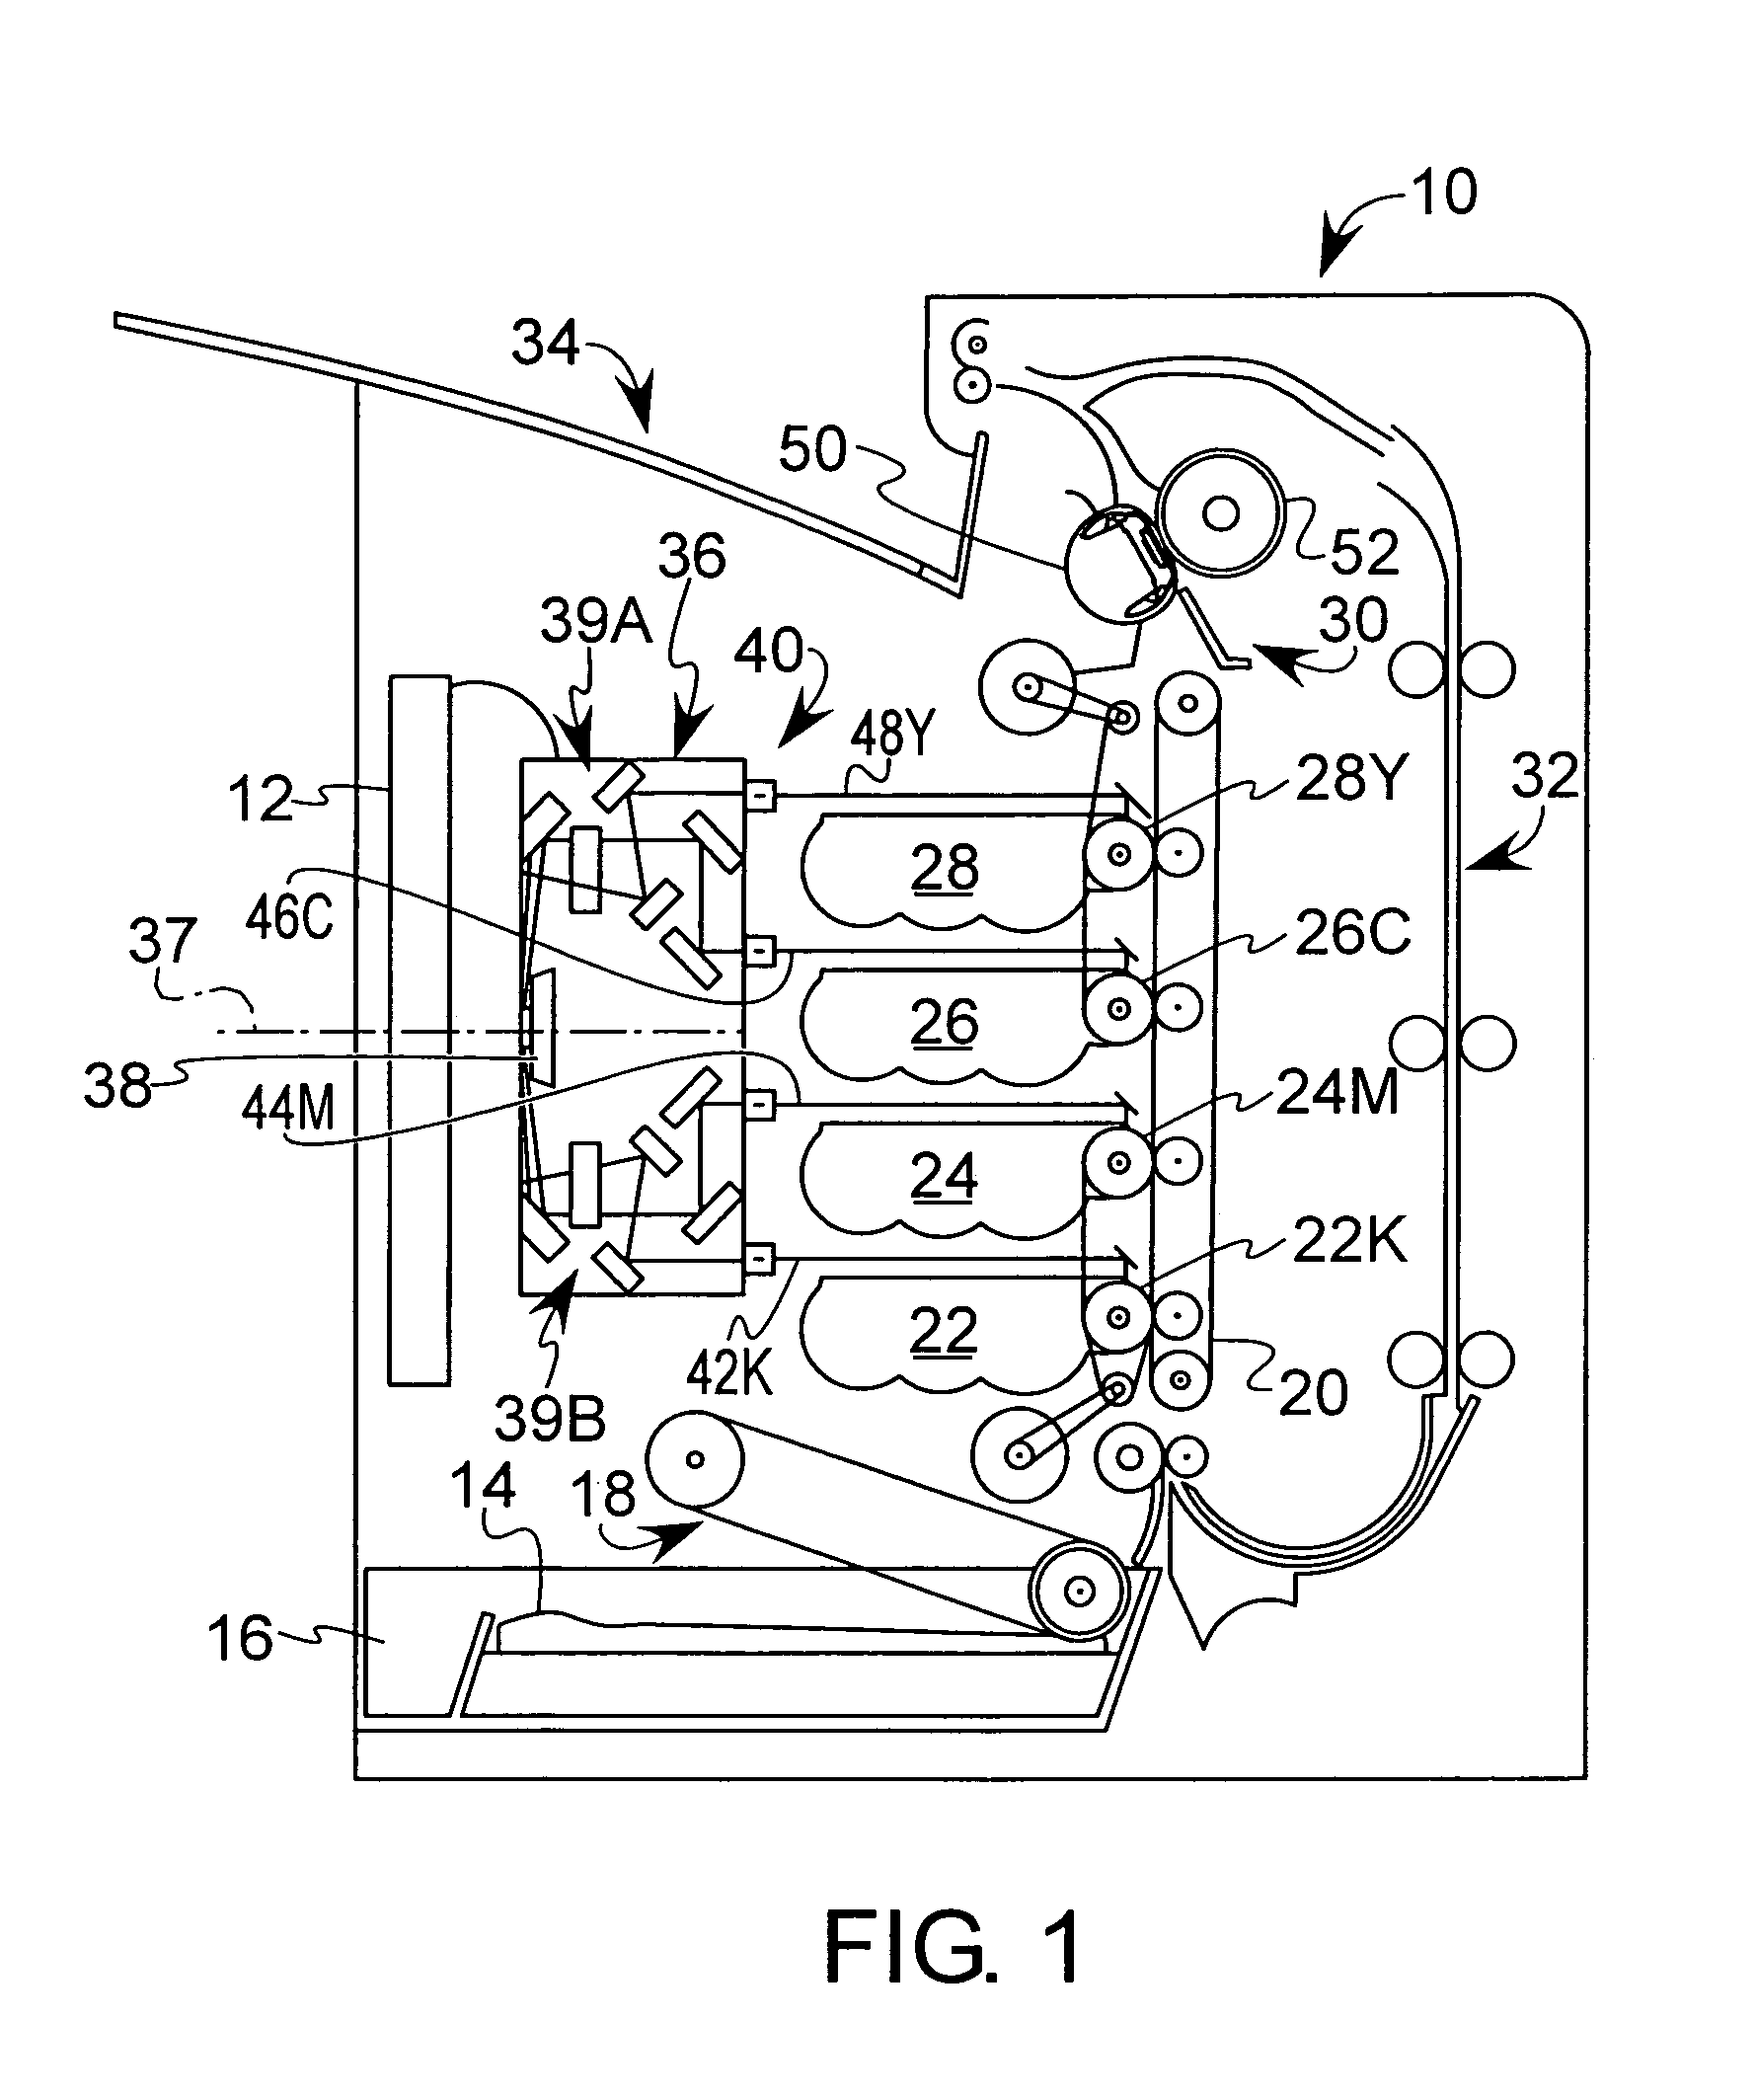 Heating apparatus with mechanical attachment